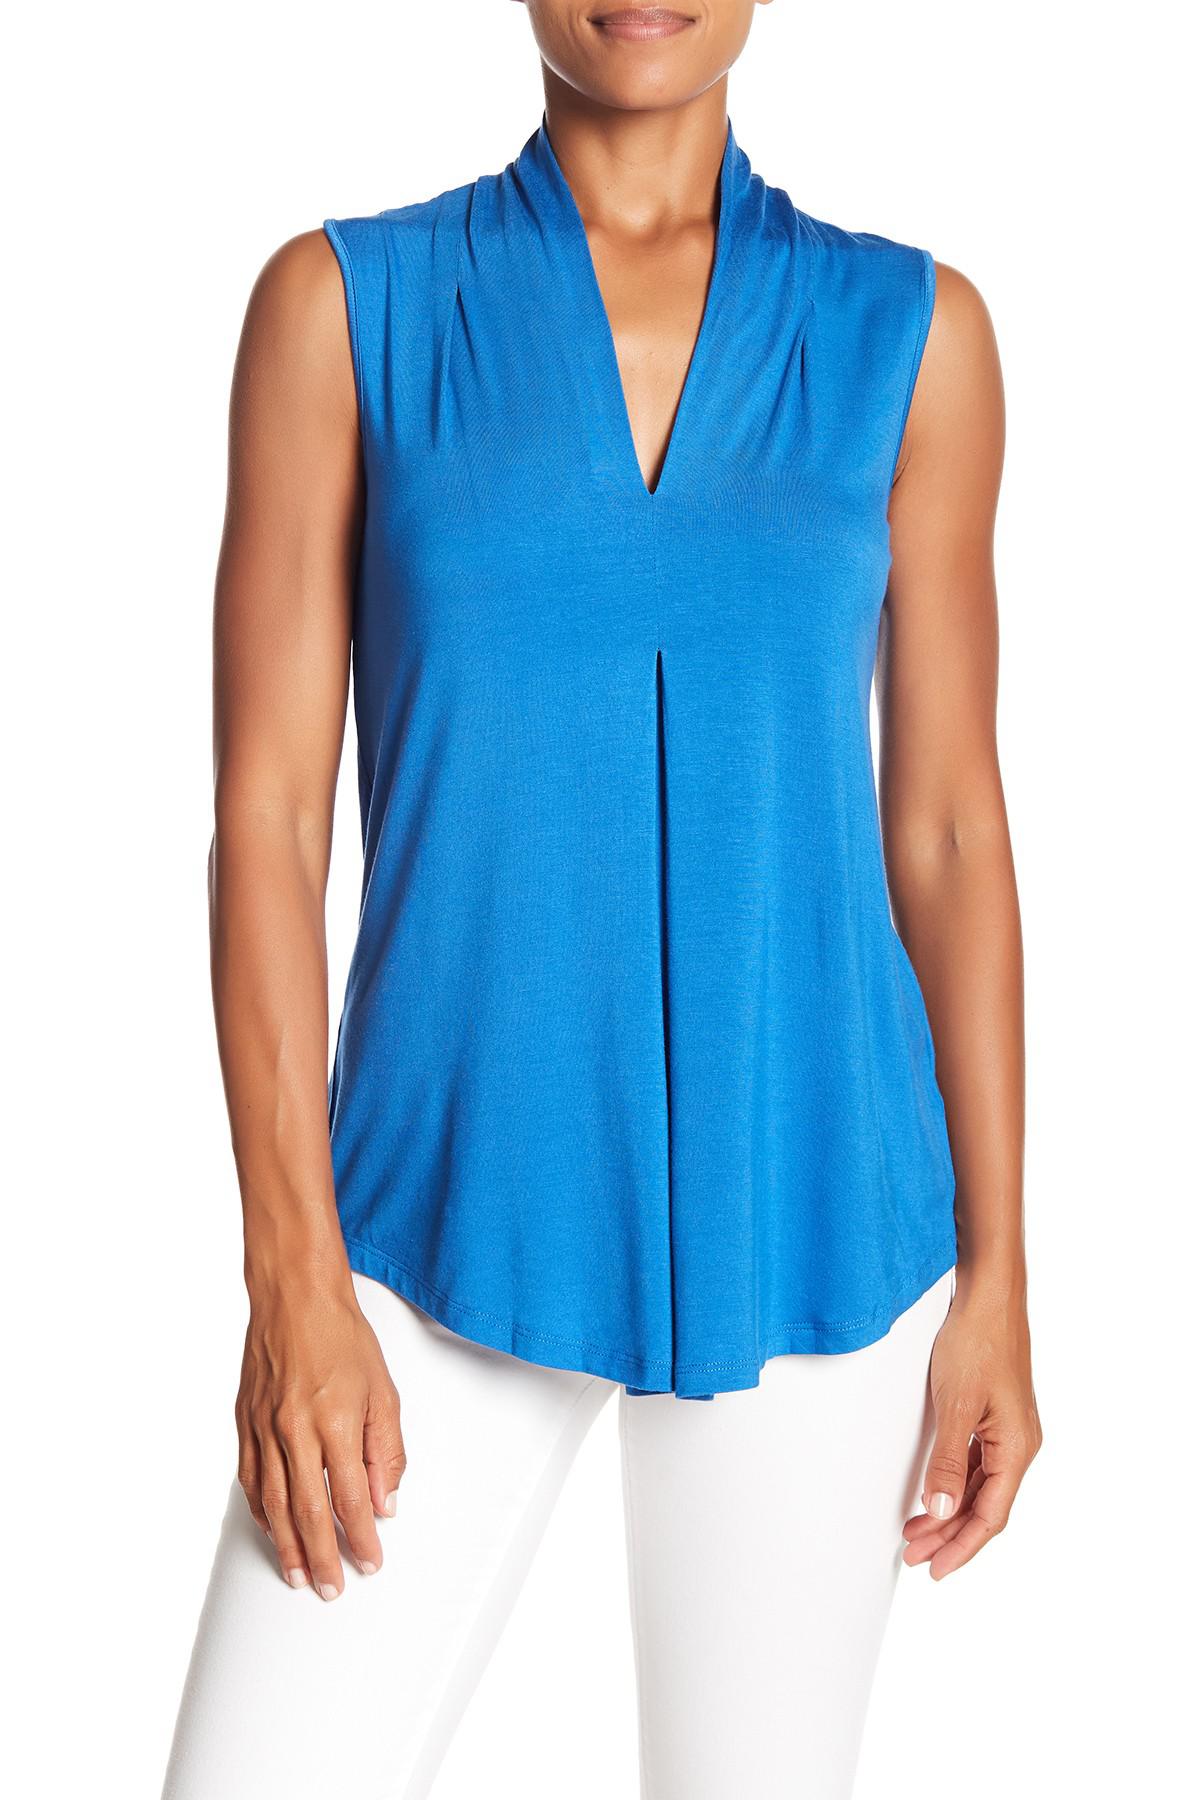 Cable amp Gauge V neck Pleat Tank Top in Blue Lyst